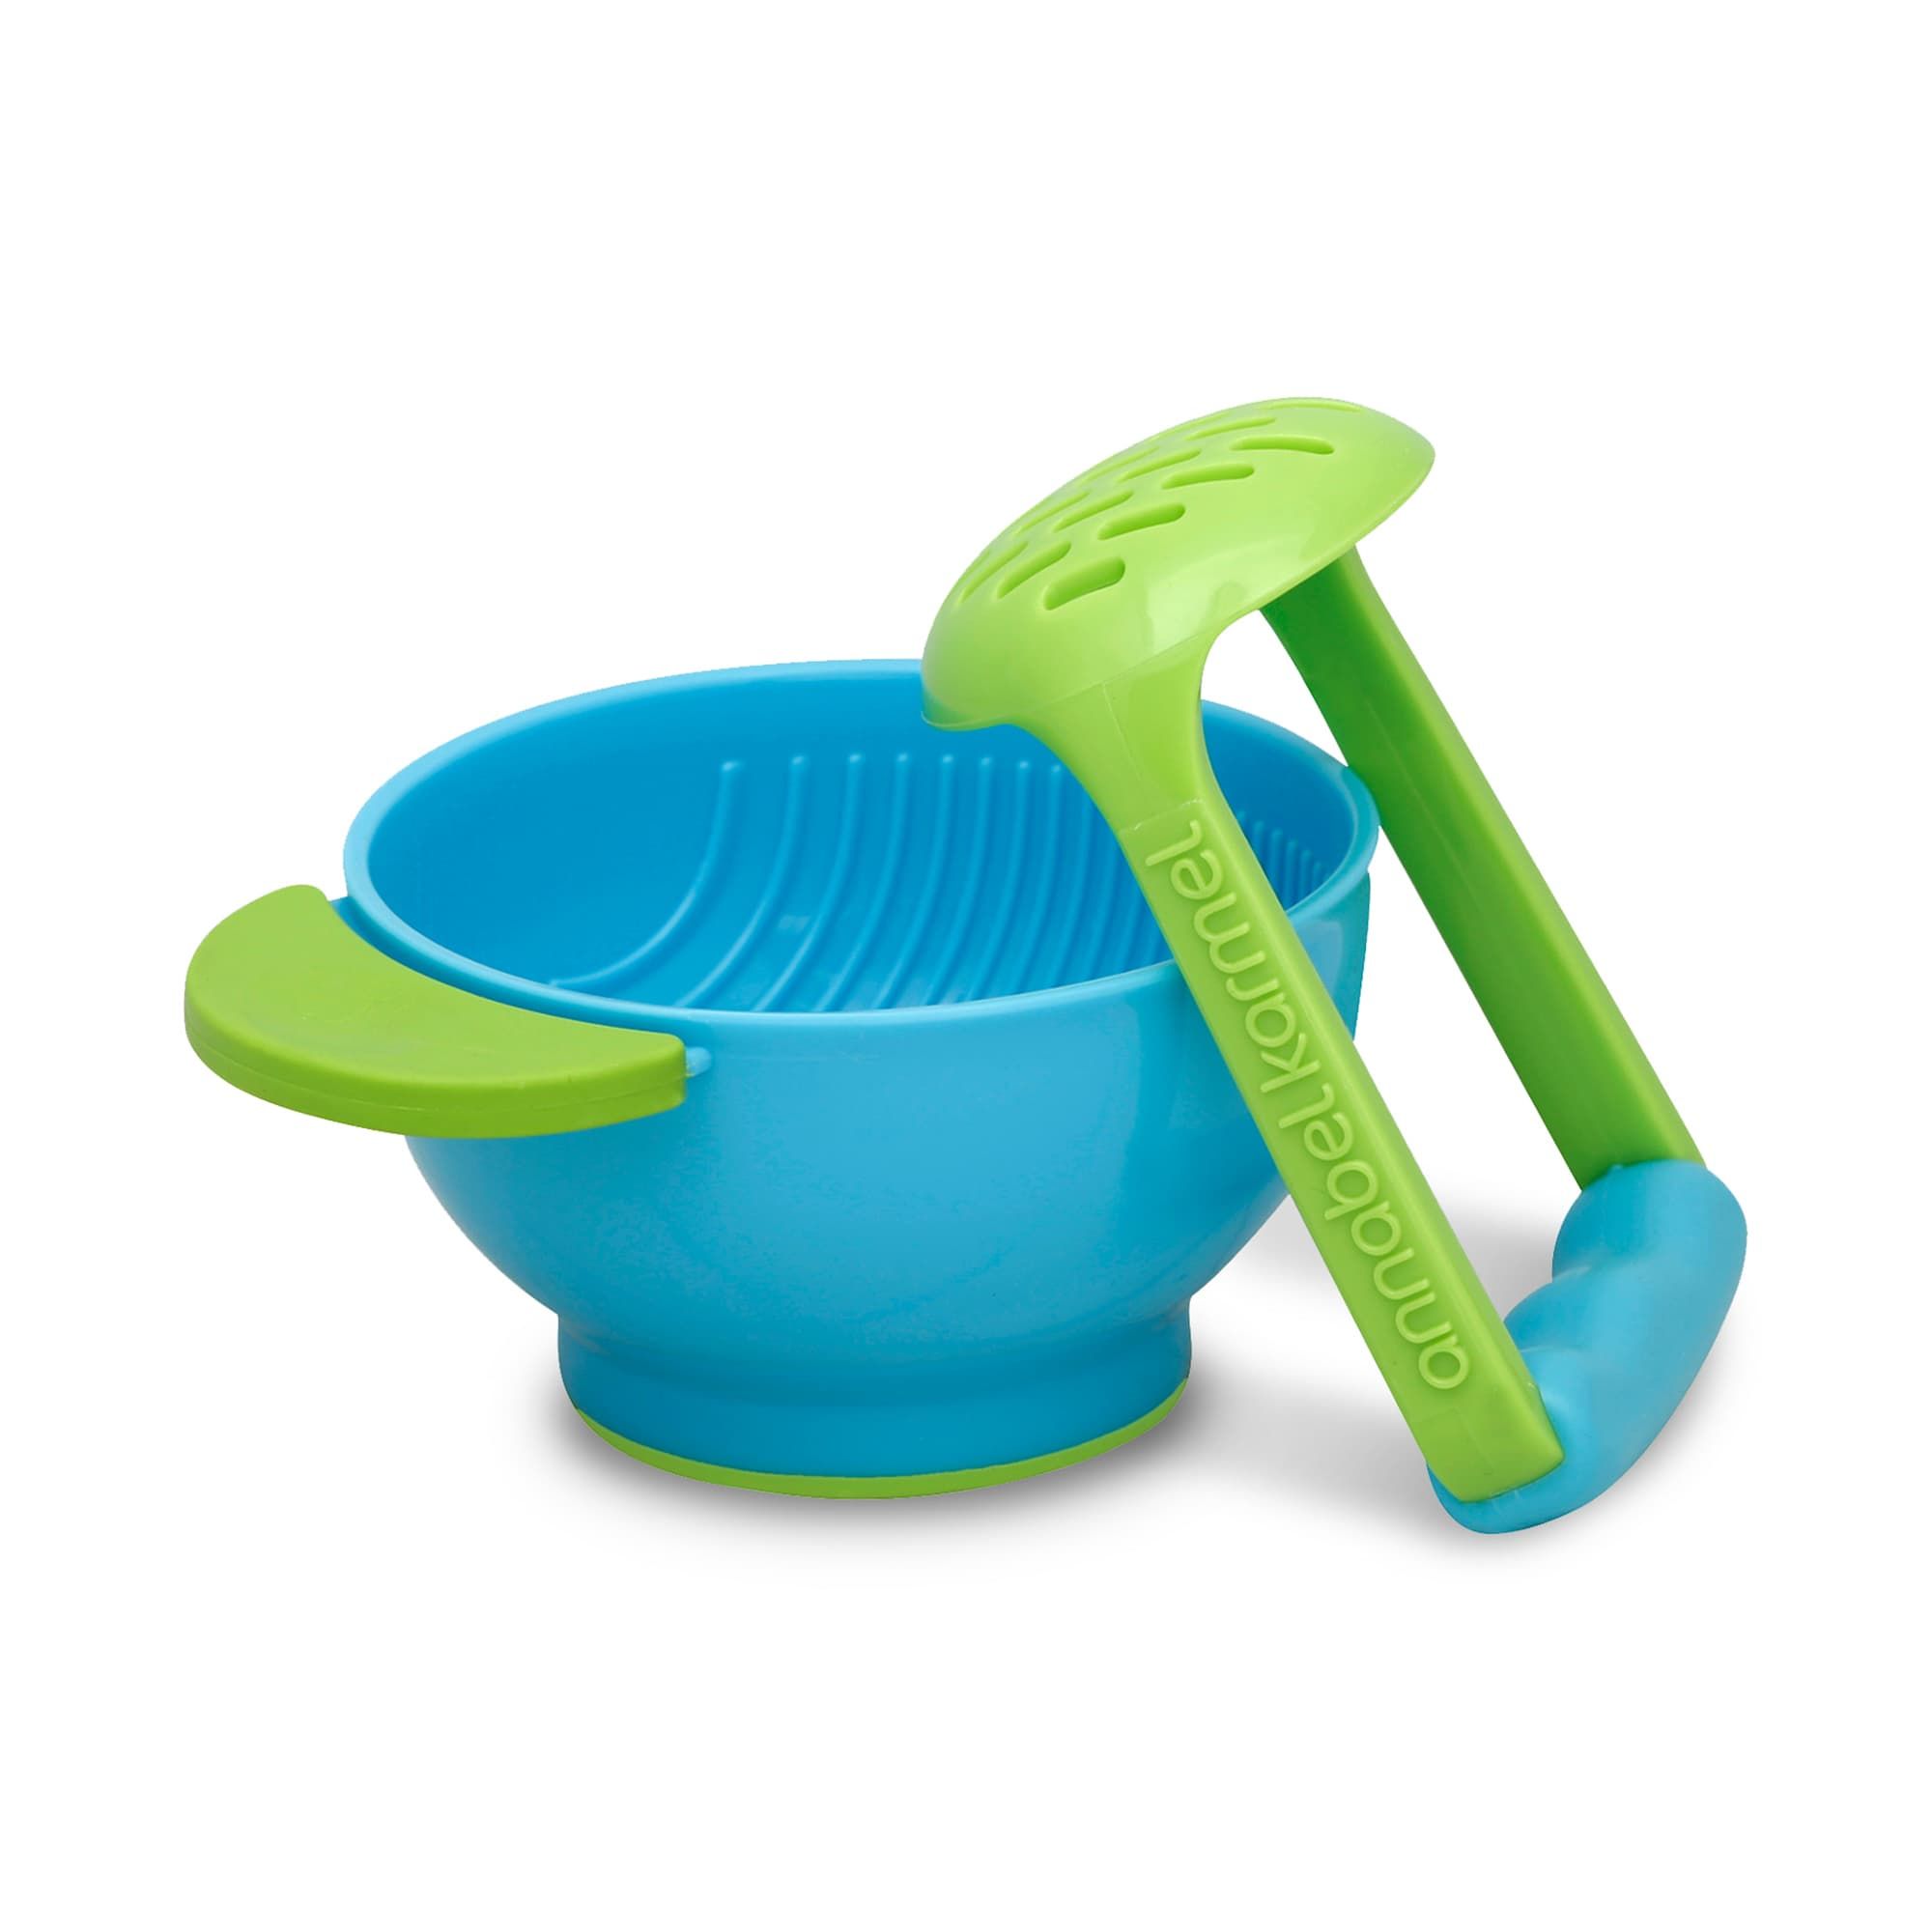 NUK® Mash & Serve Bowl with Masher to Prep and Serve Baby Food, Blue/Green - image 1 of 6